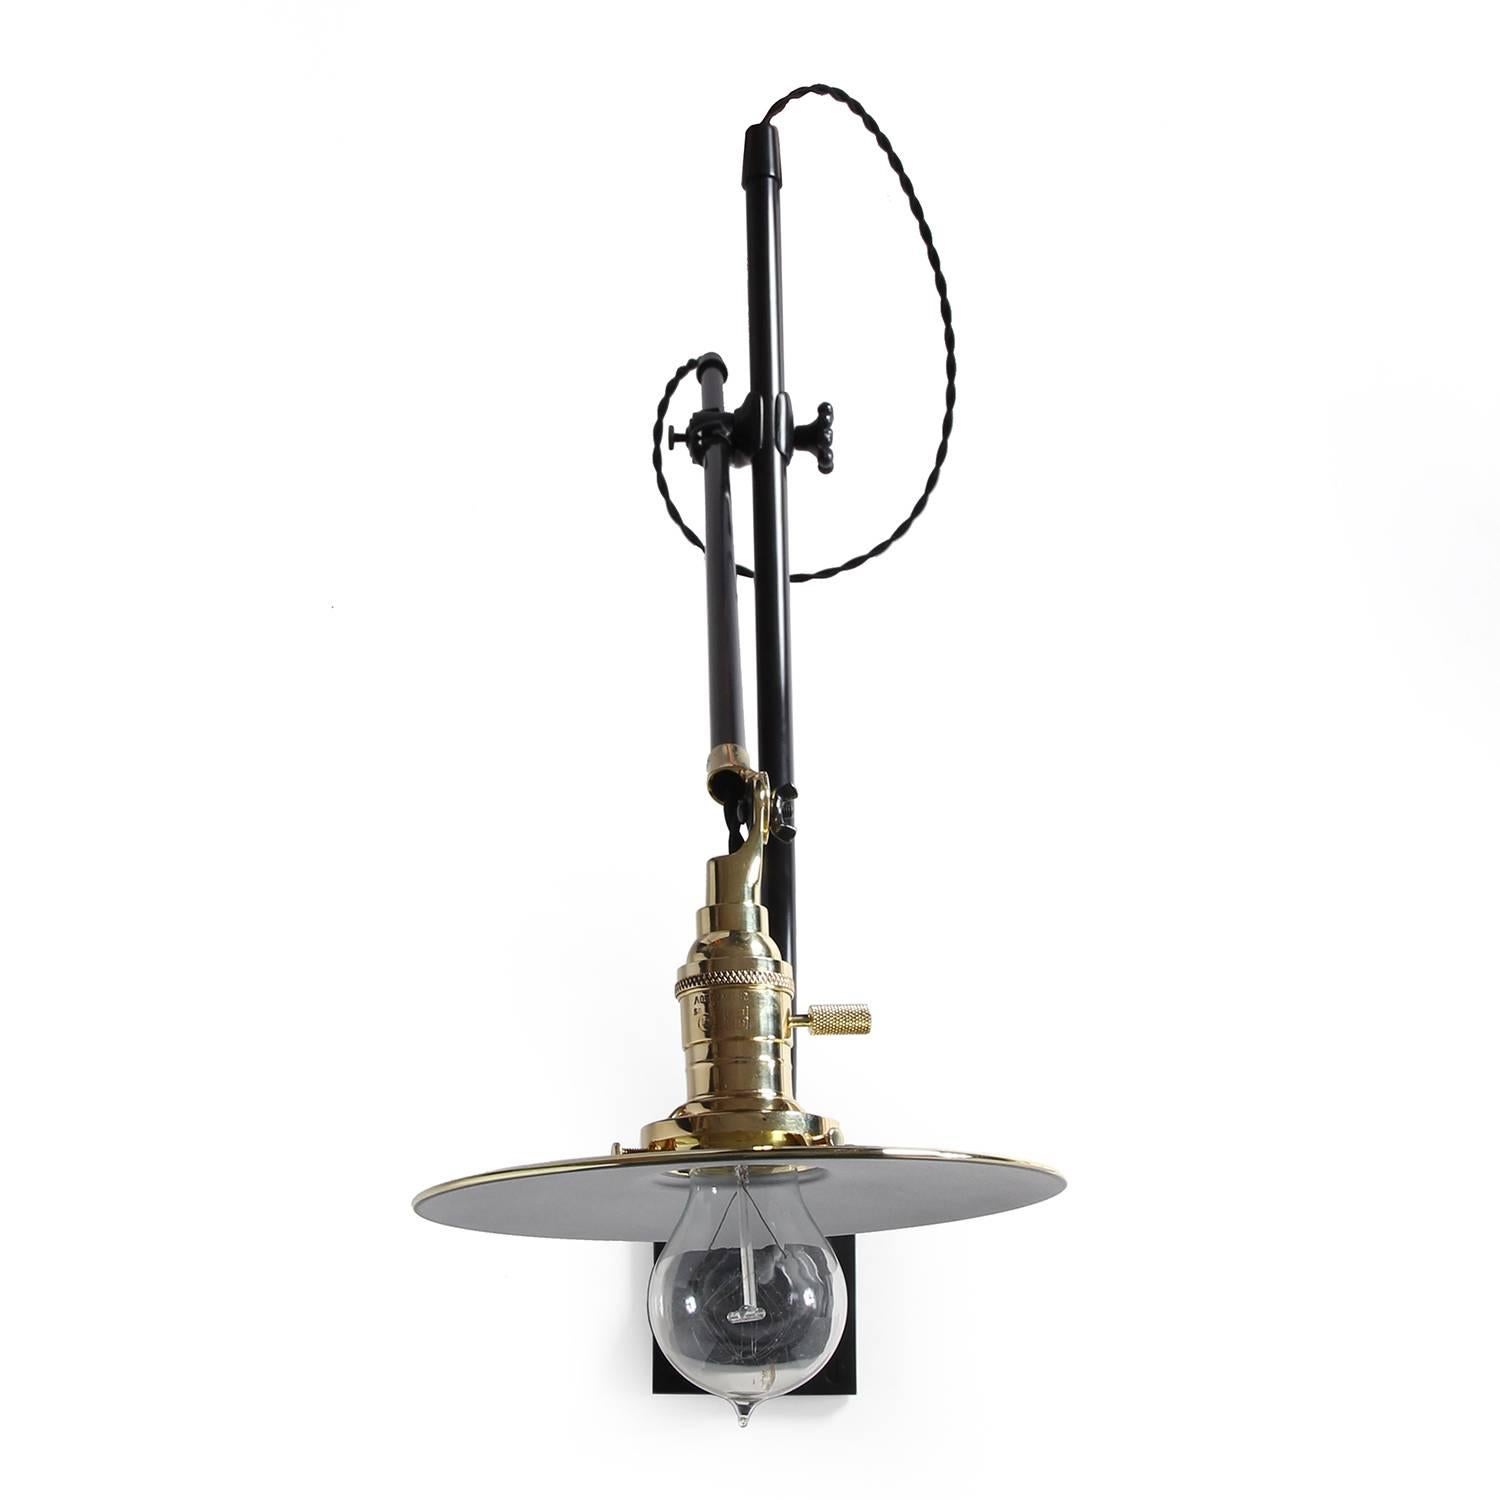 A beautifully fabricated and graceful wall lamp in patinated steel and polished brass having an articulating arm emanating from a stepped rectangular wall plate. Manufactured by O.C. White in the early 1900s.